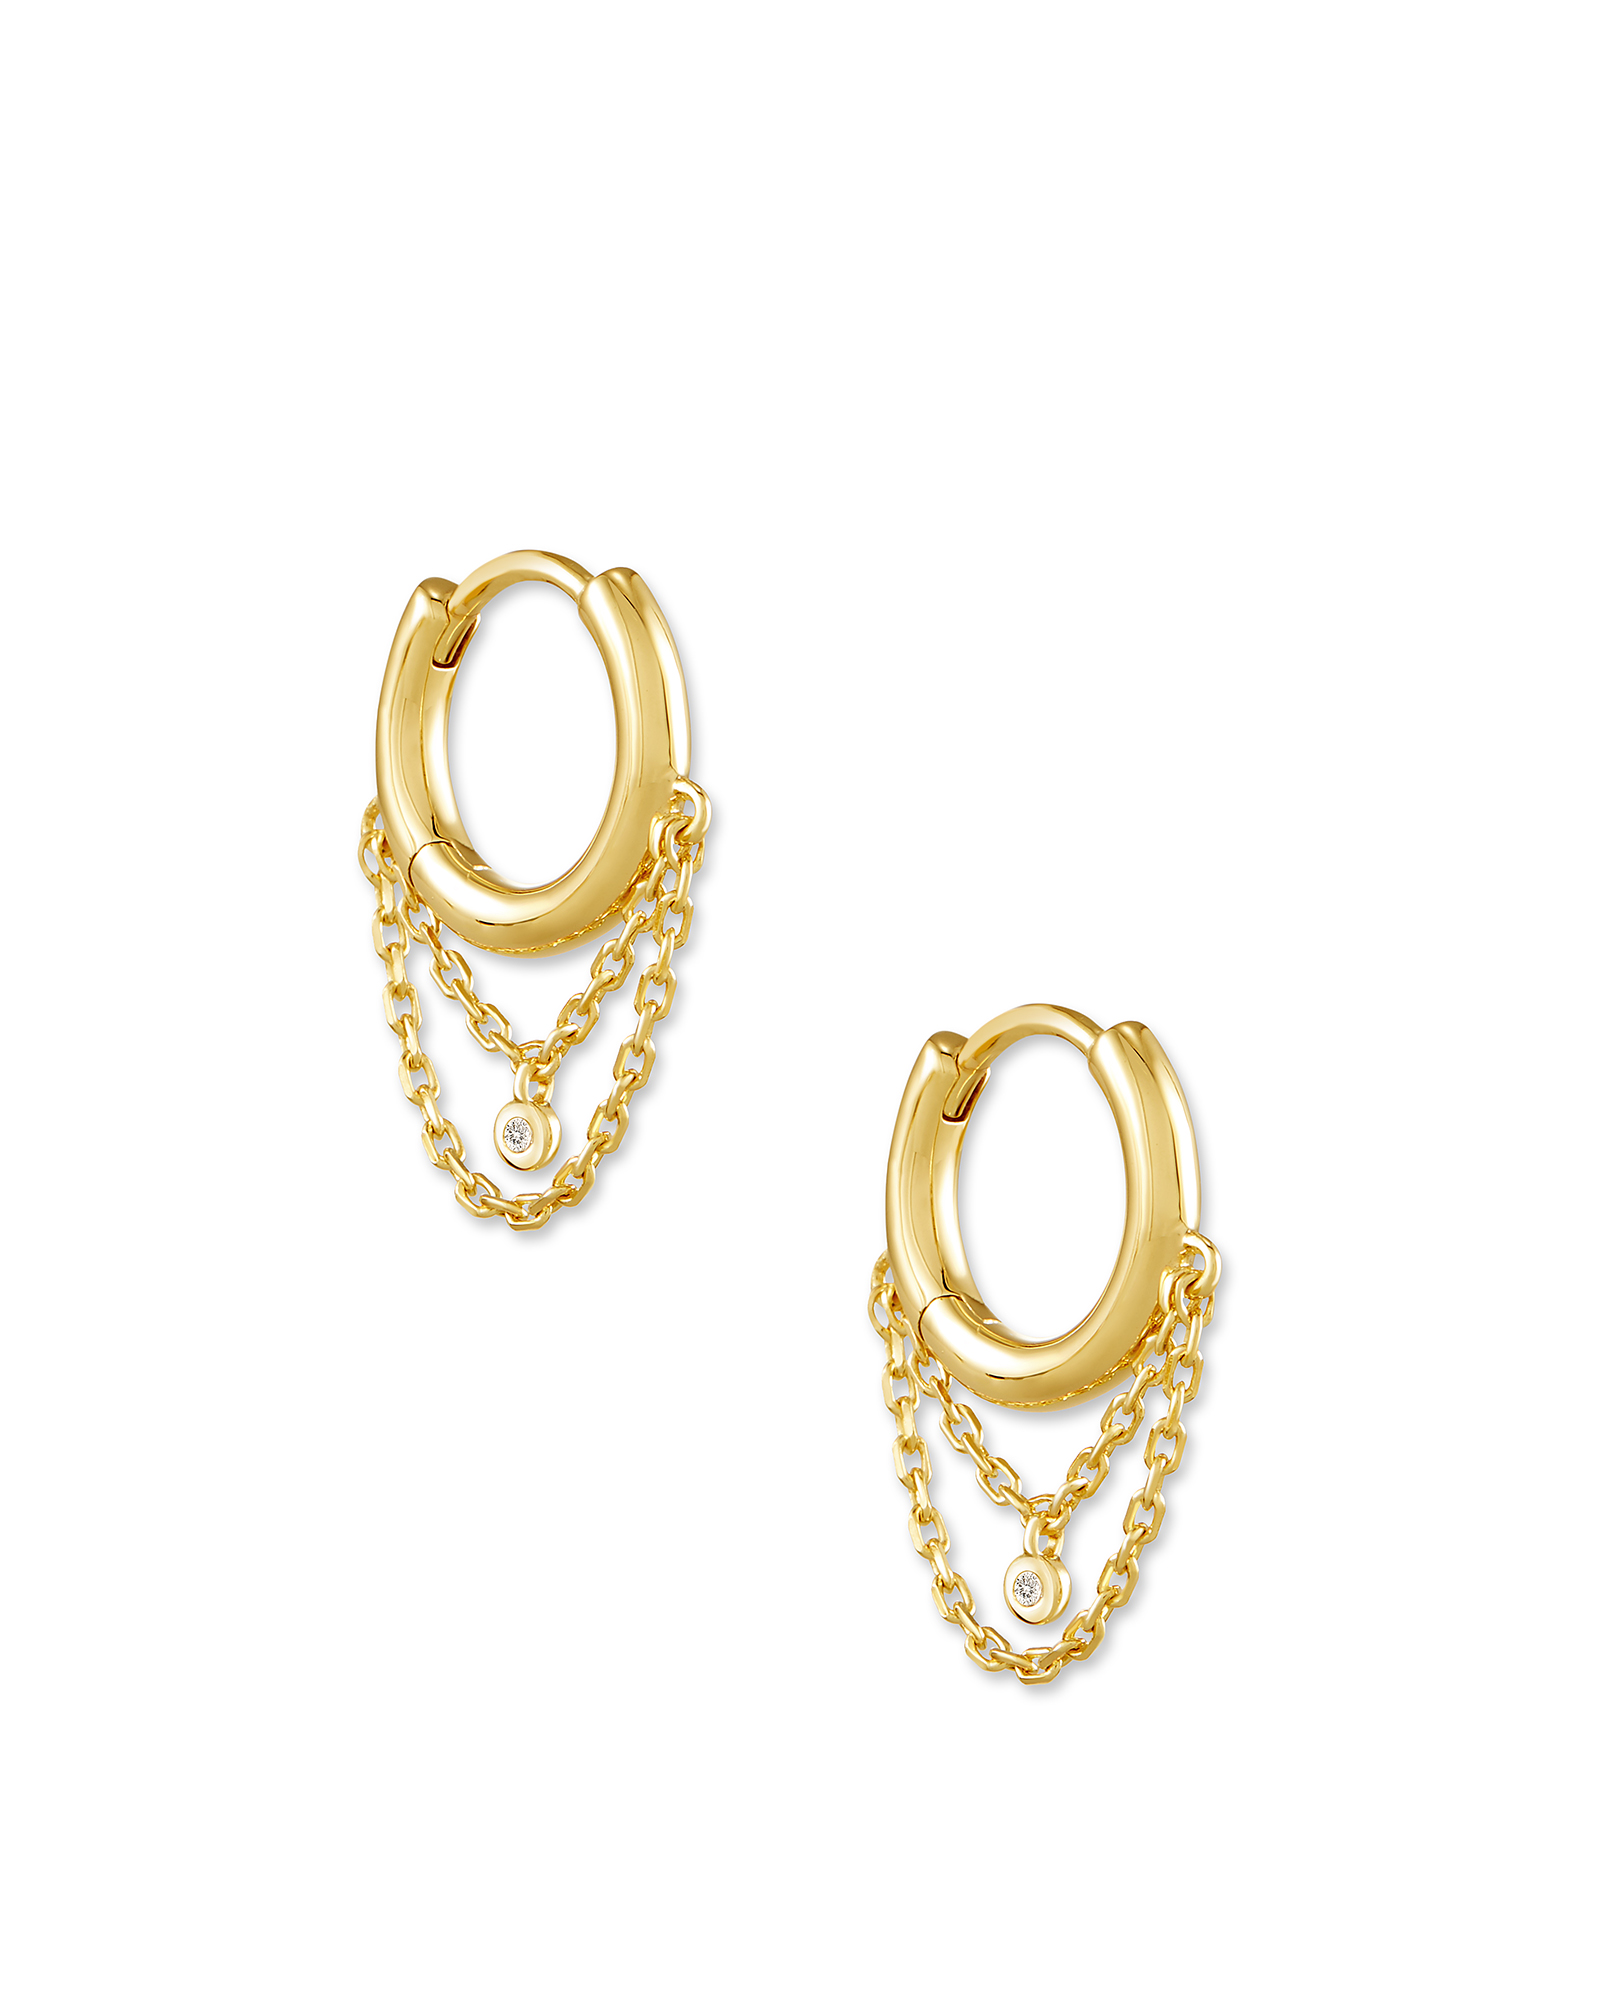 Luxury Westwood Yellow Gold Solid Gold Huggie Earrings With